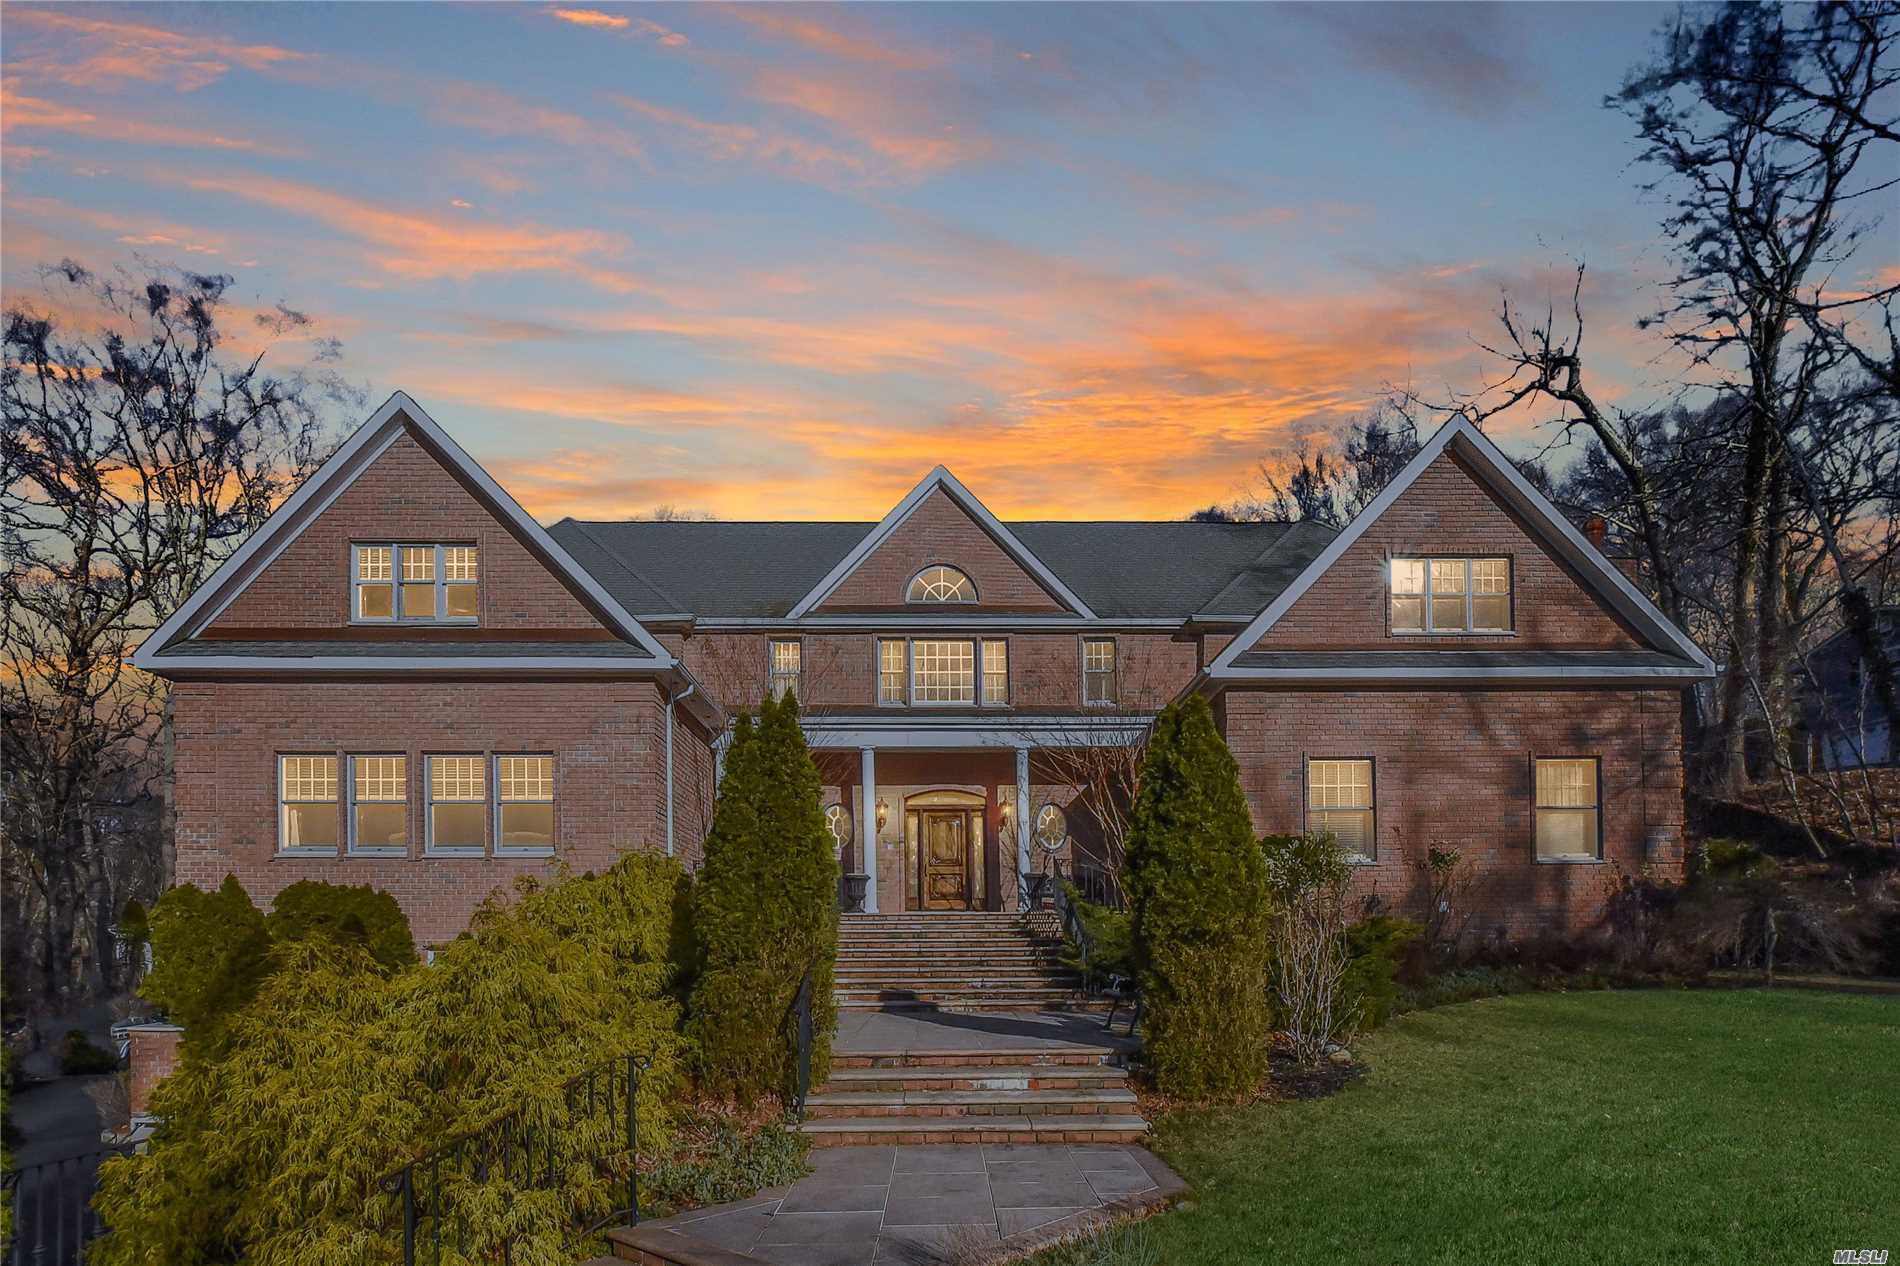 This 5800 Sf All Brick Designer Showplace Is Set Upon 2 Acres Across From Stony Brook Harbor. Winter Water Views Can Be Enjoyed Throughout This Beauty. Among Its Obvious Custom Design, You Will Find Attention To Detail At Every Turn. Come Inside And Experience Its 10Ft Ceilings, Mahogany Flrs, Gourmet Kit W/Granite Countertops, Arched Doorways, 1st Fl Master Suite Overlooking Igp And So Much More. Relax By The Fp, Entertain Both Inside & Out. Experience The Luxury That Awaits Within.